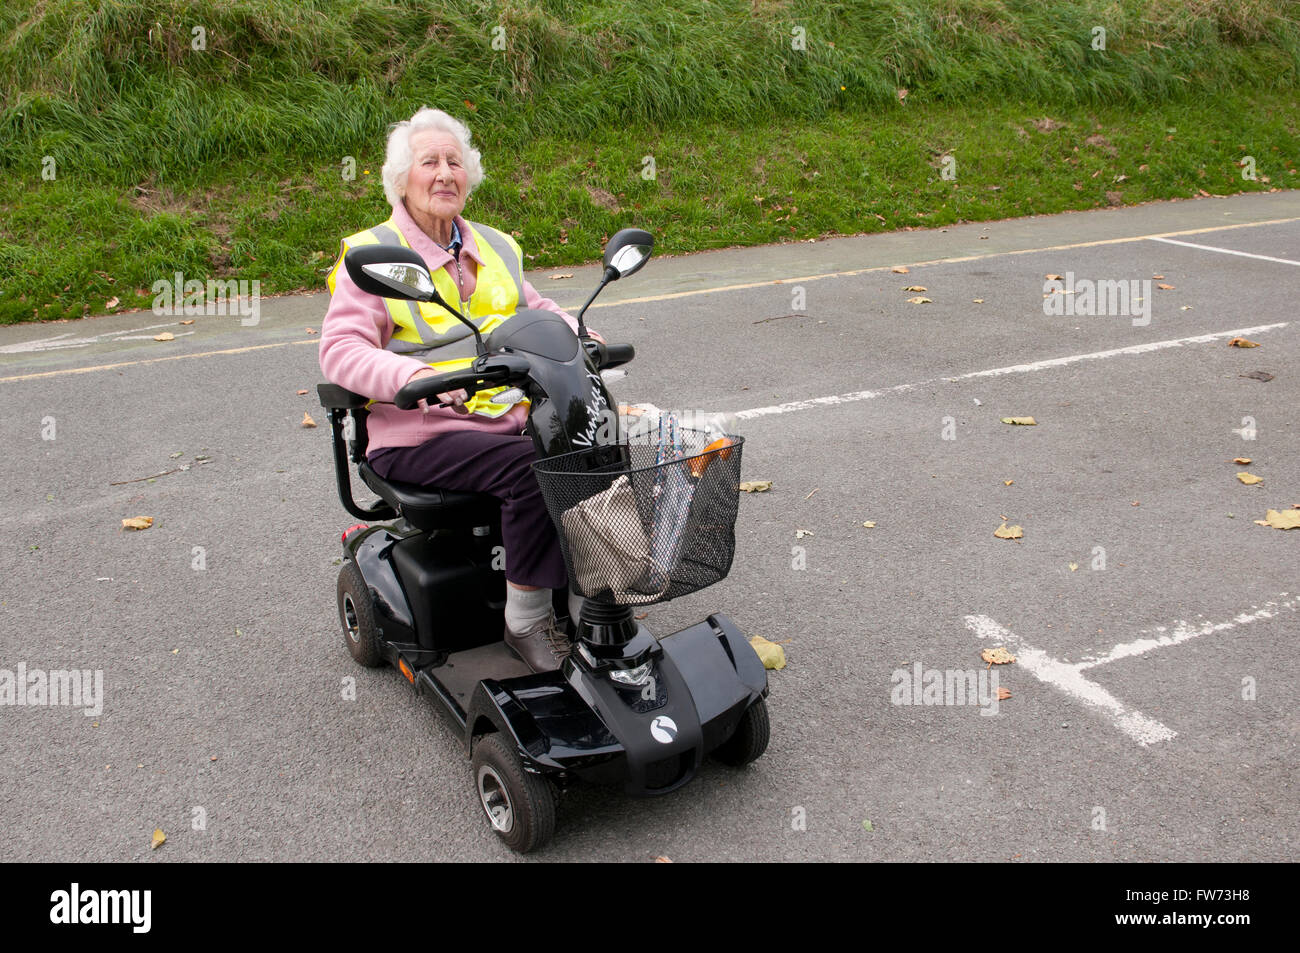 Elderly woman using a mobility scooter wearing a yellow hi-vis safety vest  Stock Photo - Alamy